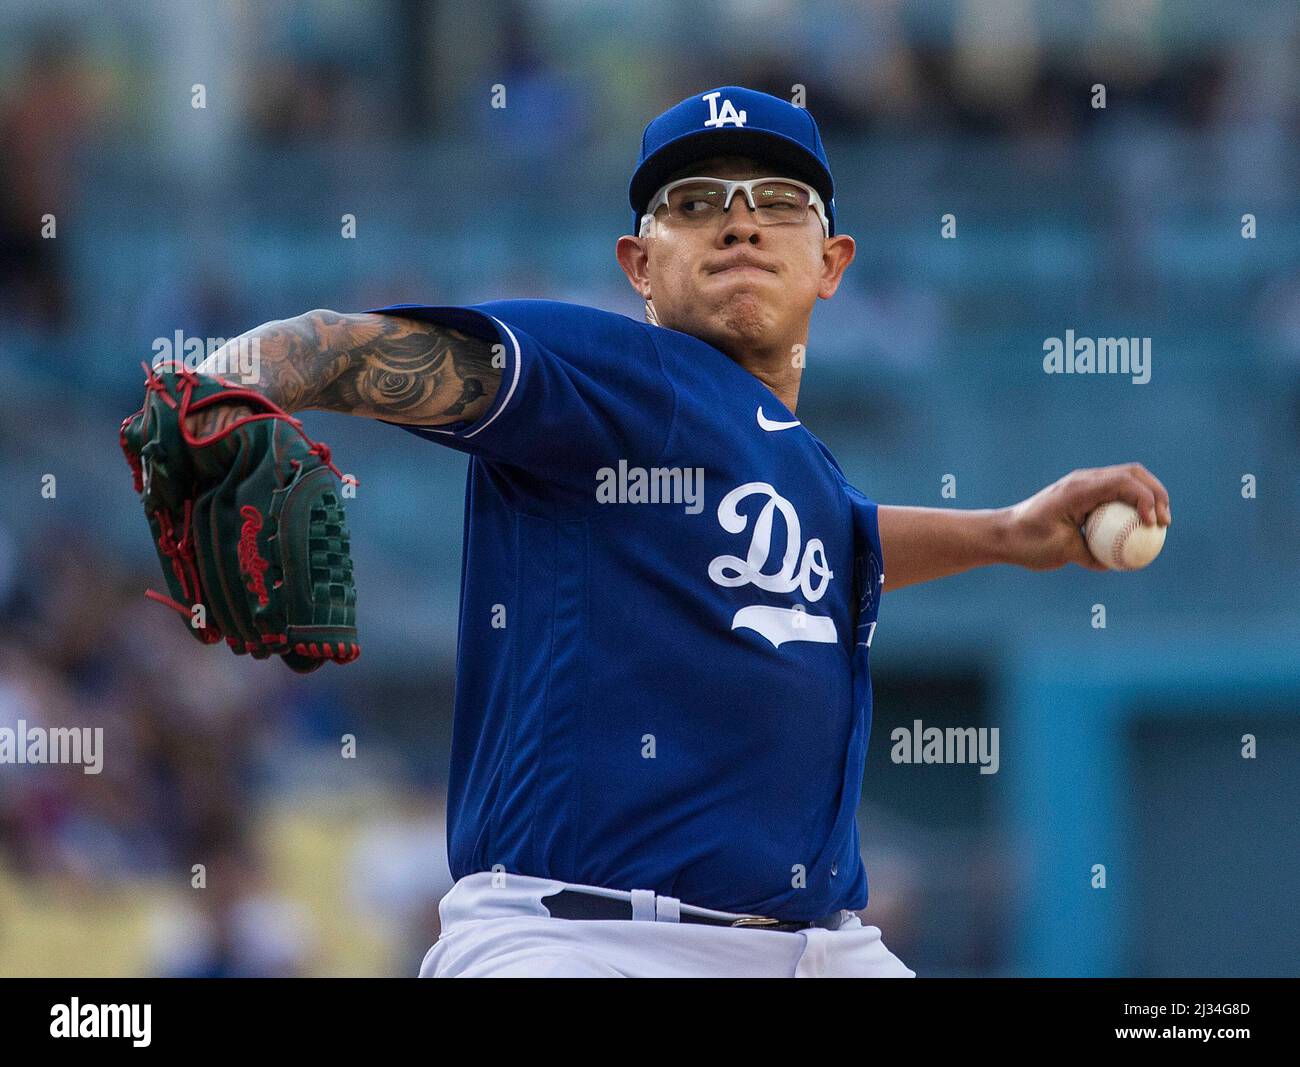 Los Angeles, United States. 04th Apr, 2022. Los Angeles Dodgers pitcher Julio  Urias (7) during a MLB spring training baseball game against the Los  Angeles Angels, Tuesday, Apr. 4, 2022, in Los